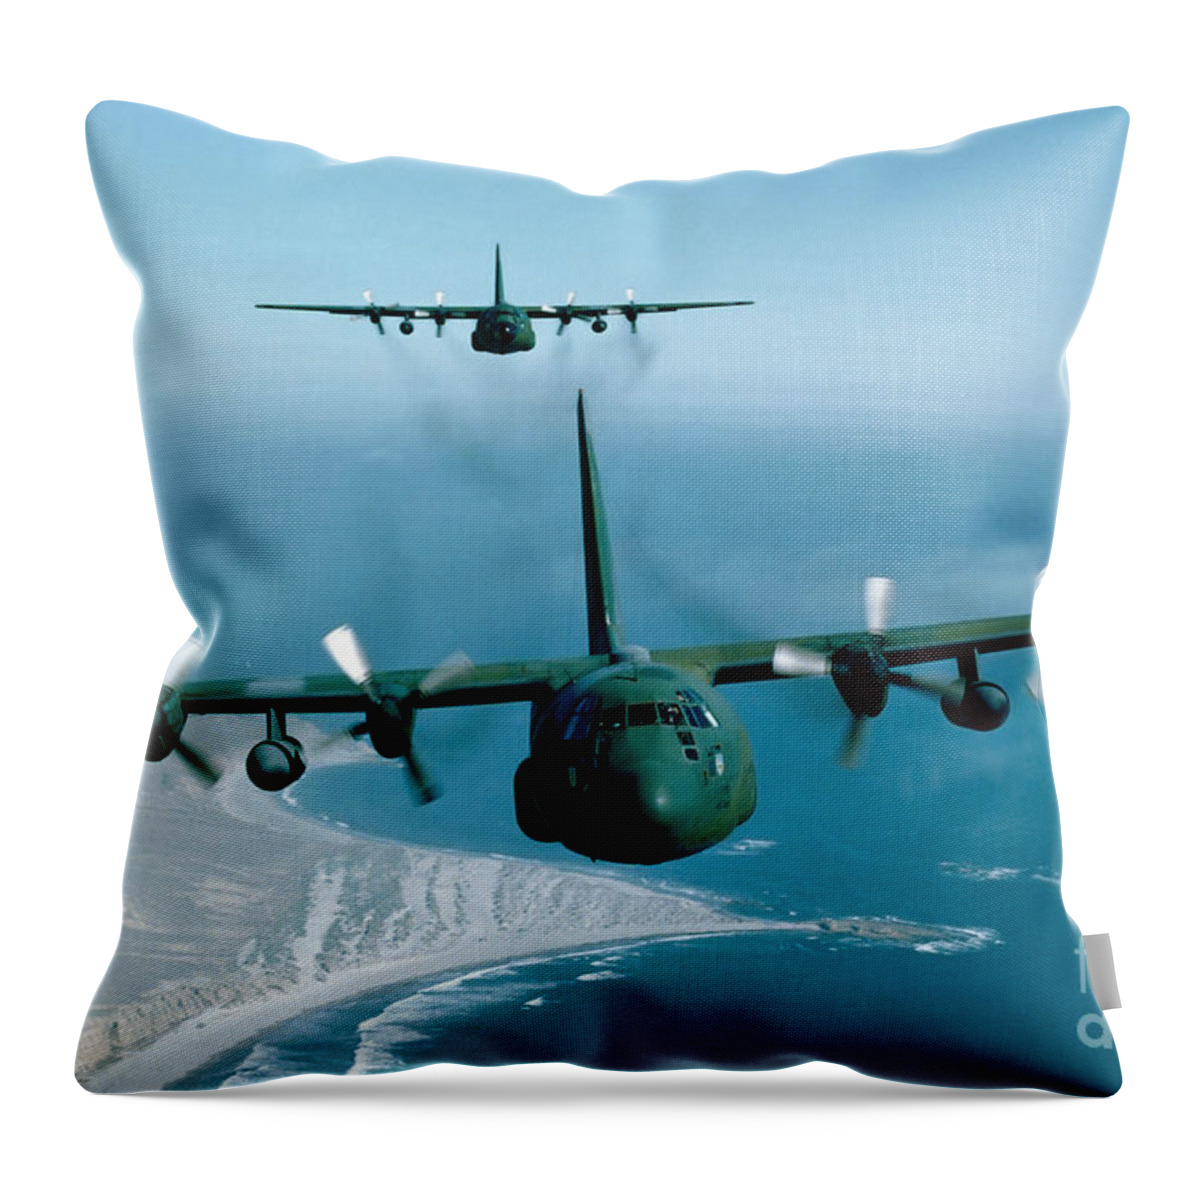 Horizontal Throw Pillow featuring the photograph A Pair Of C-130 Hercules In Flight by Stocktrek Images